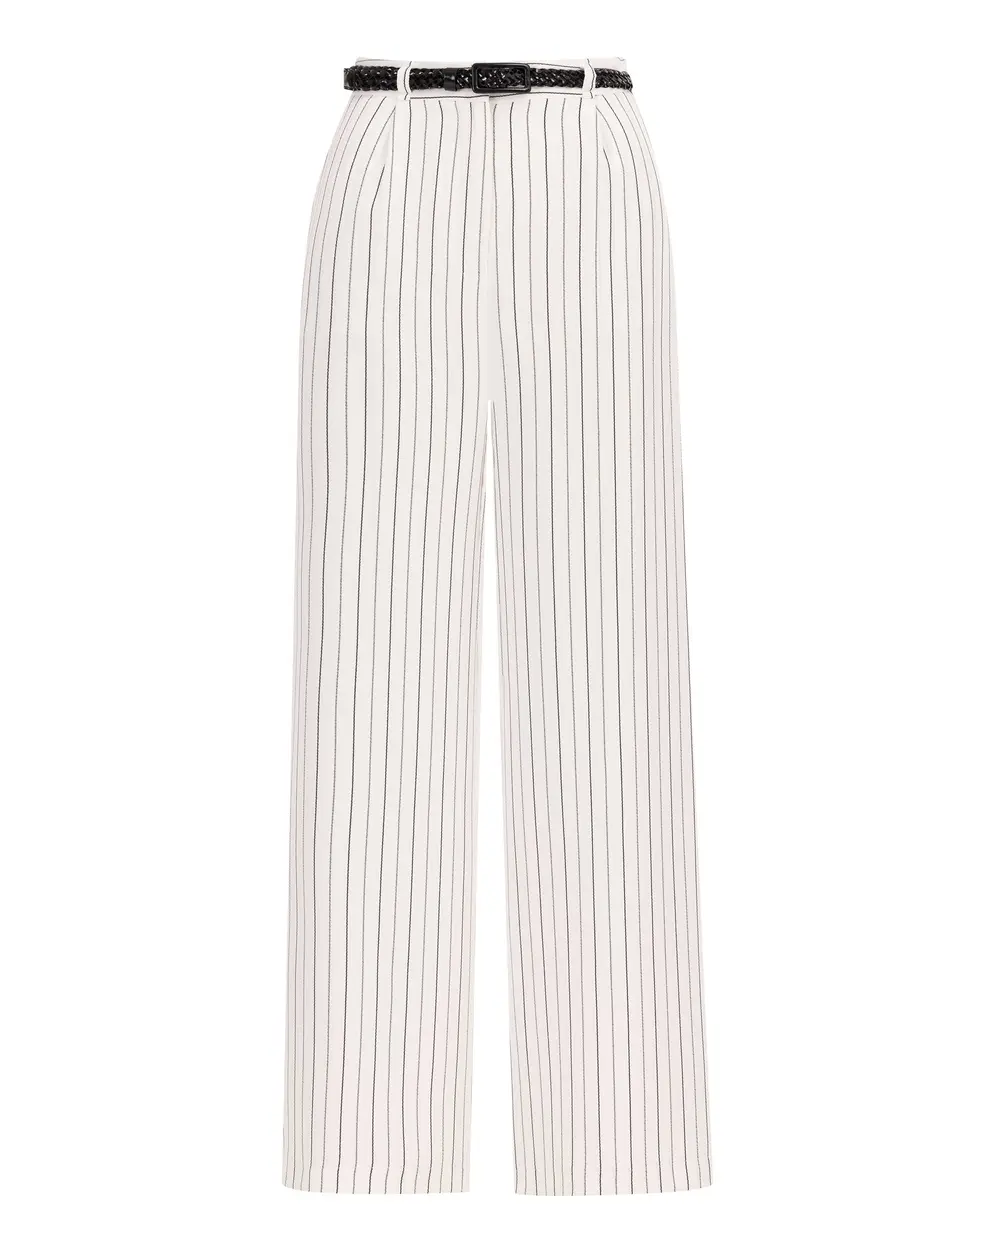 Belted High Waist Striped Trousers